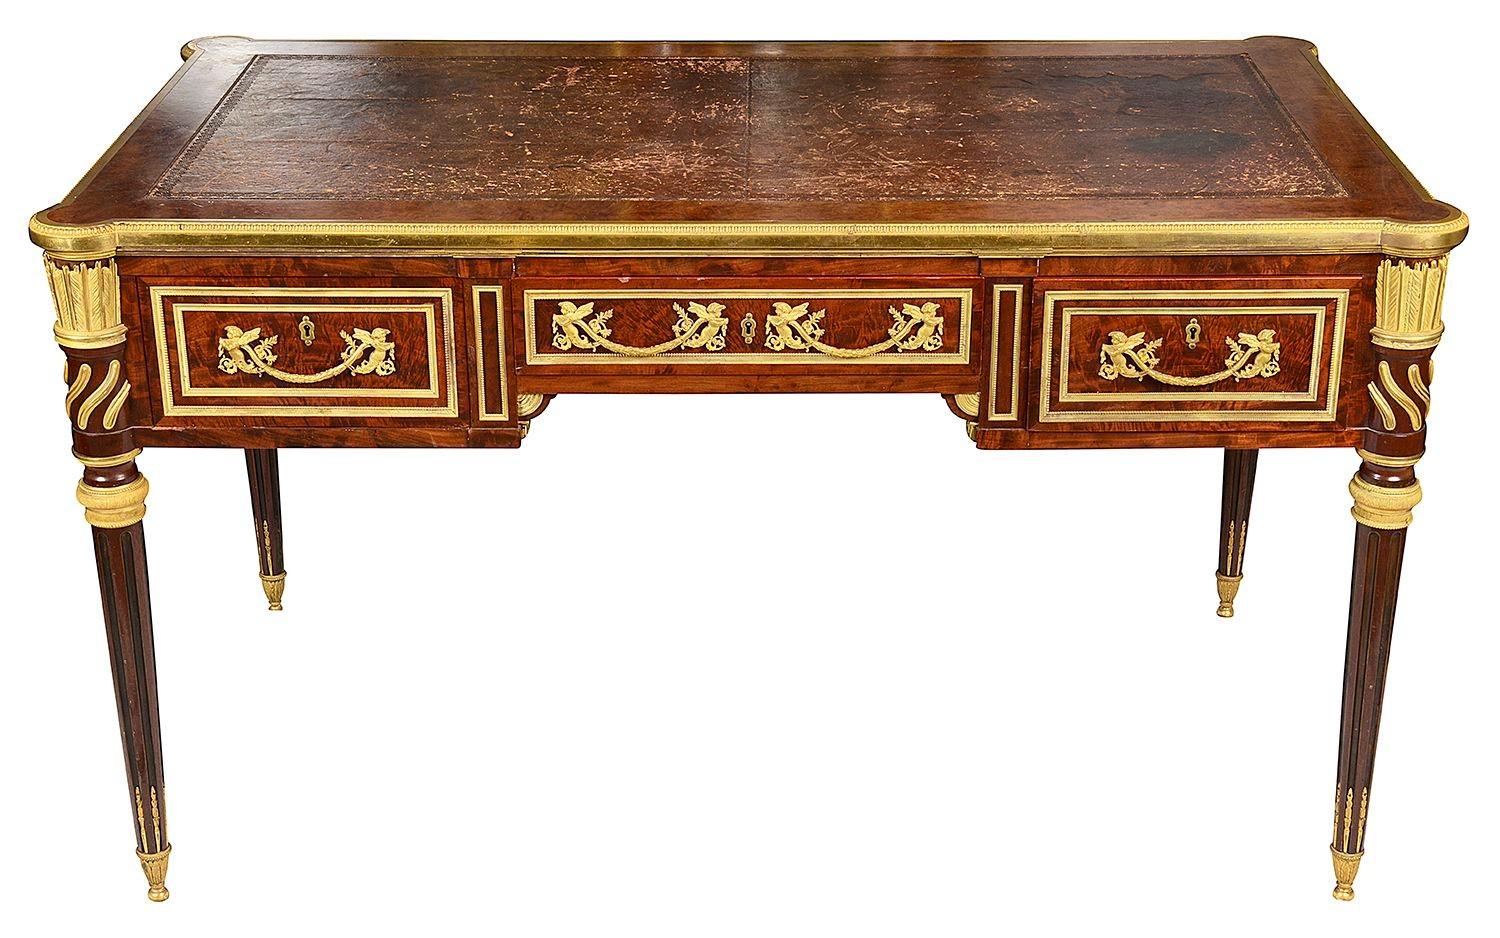 A fine quality late 19th century French Mahogany Bureau plat in the Louis XVI style. Having an inset leather top, writing slides to either side, mercury gilded ormolu mounts and mouldings, three frieze drawers, arrow quiver like ormolu mounts above